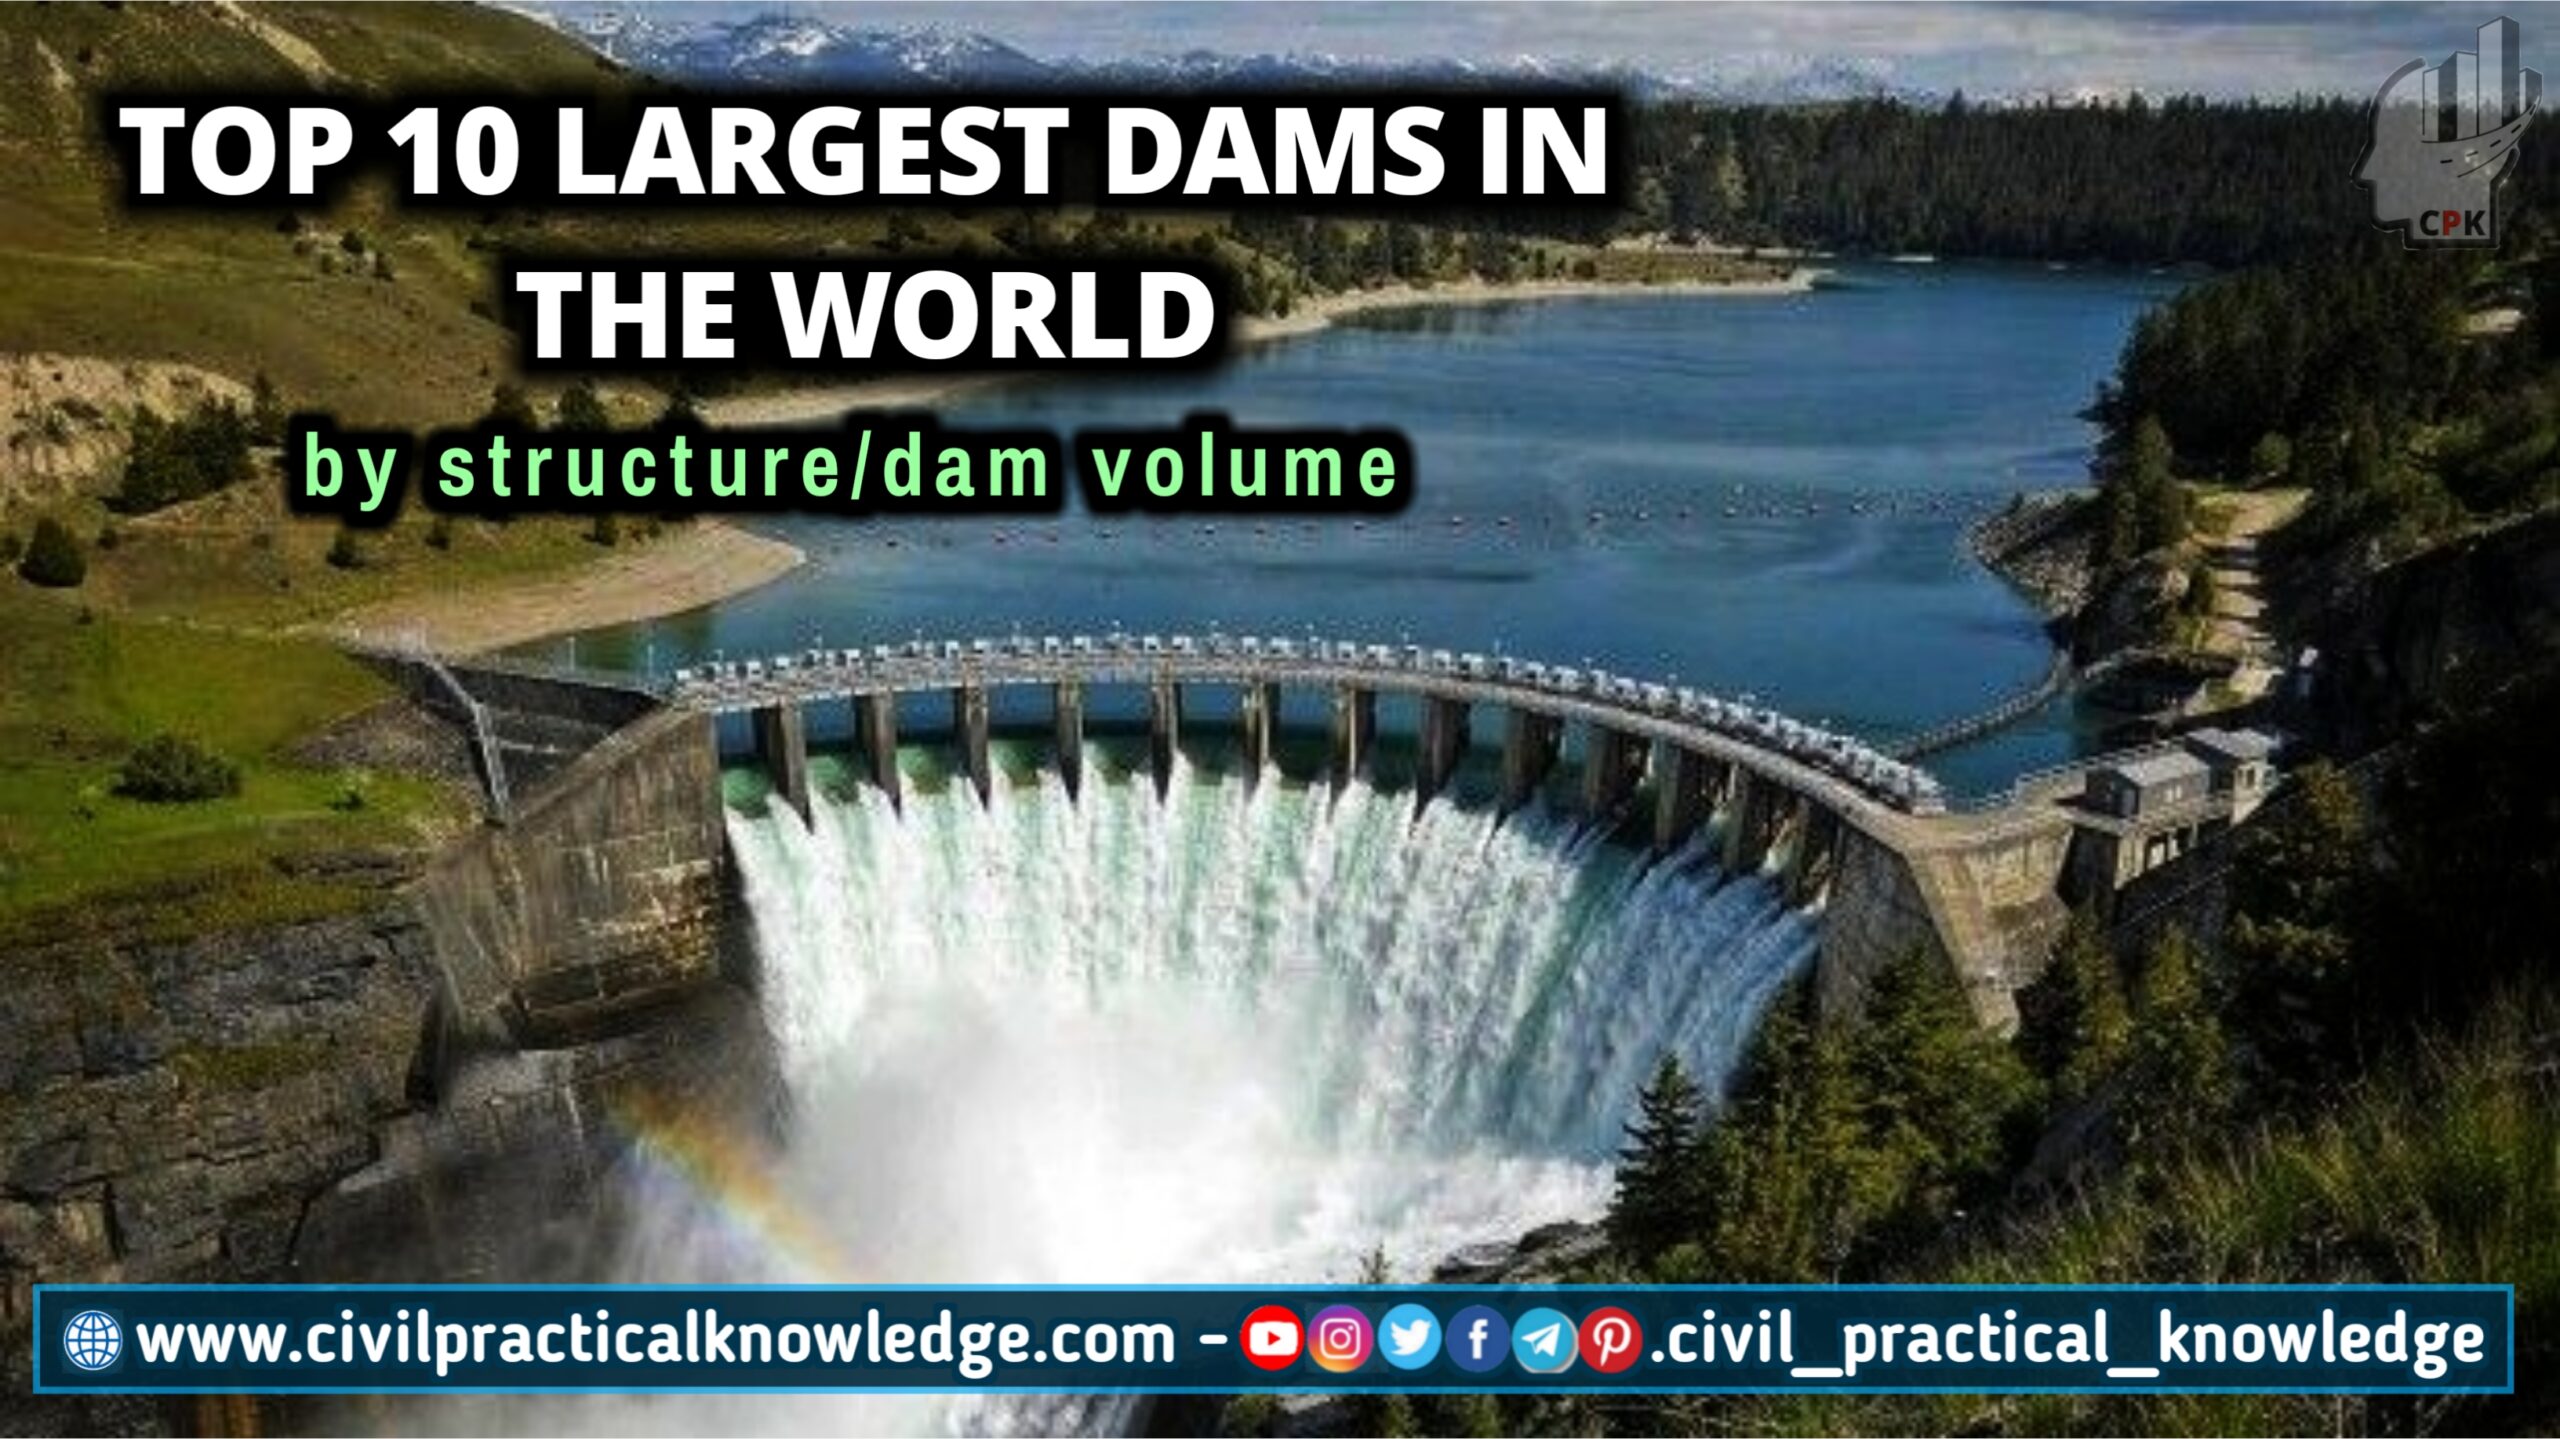 Slovenia myself Drought Top 10 Largest Dams In The World » Civil Practical Knowledge